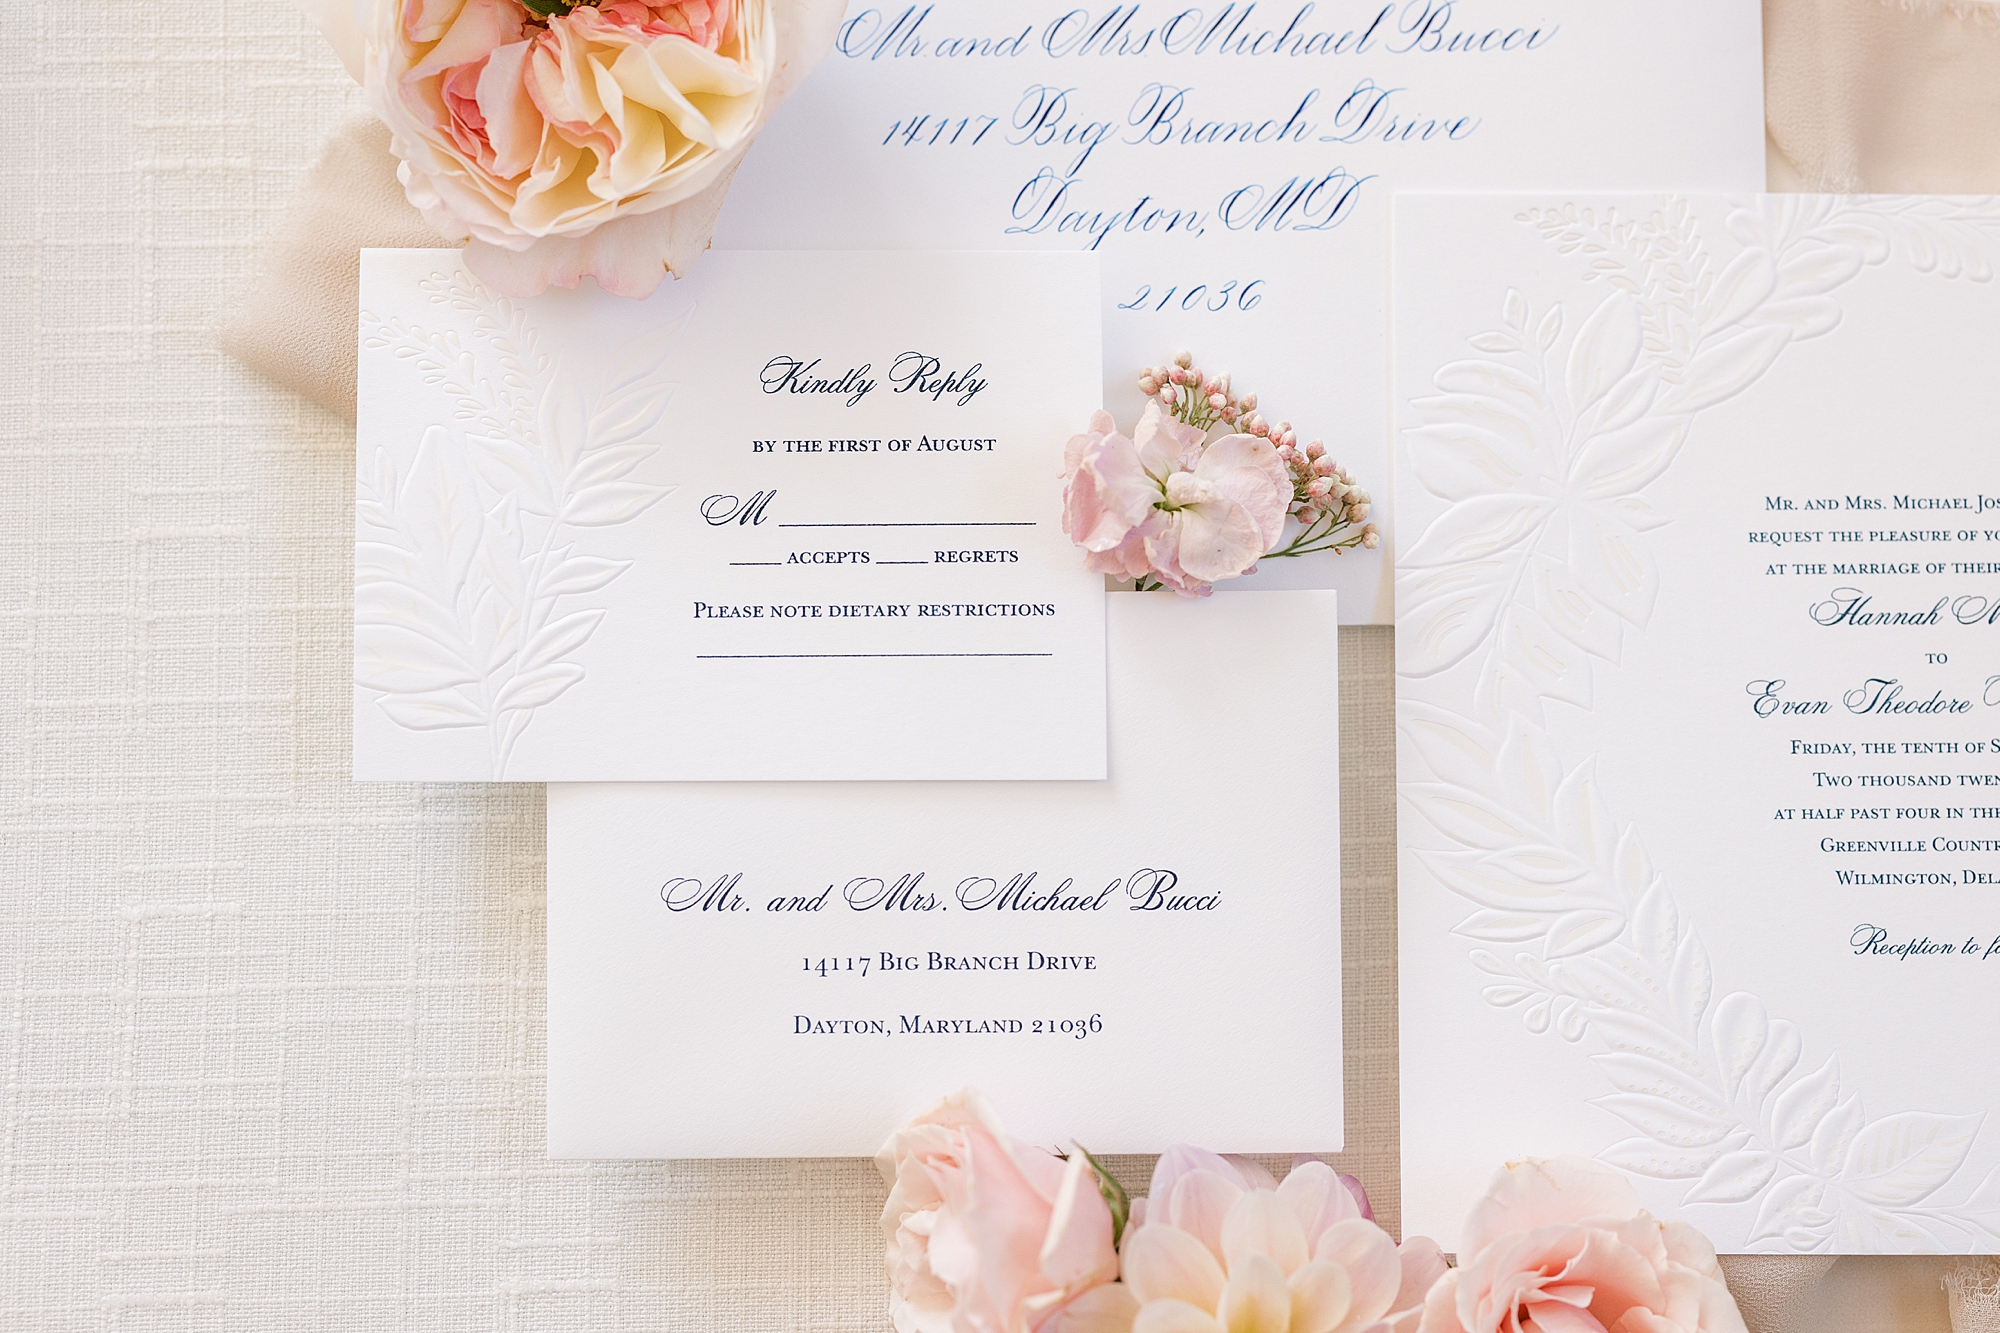 calligraphy in navy ink on envelope for fall wedding